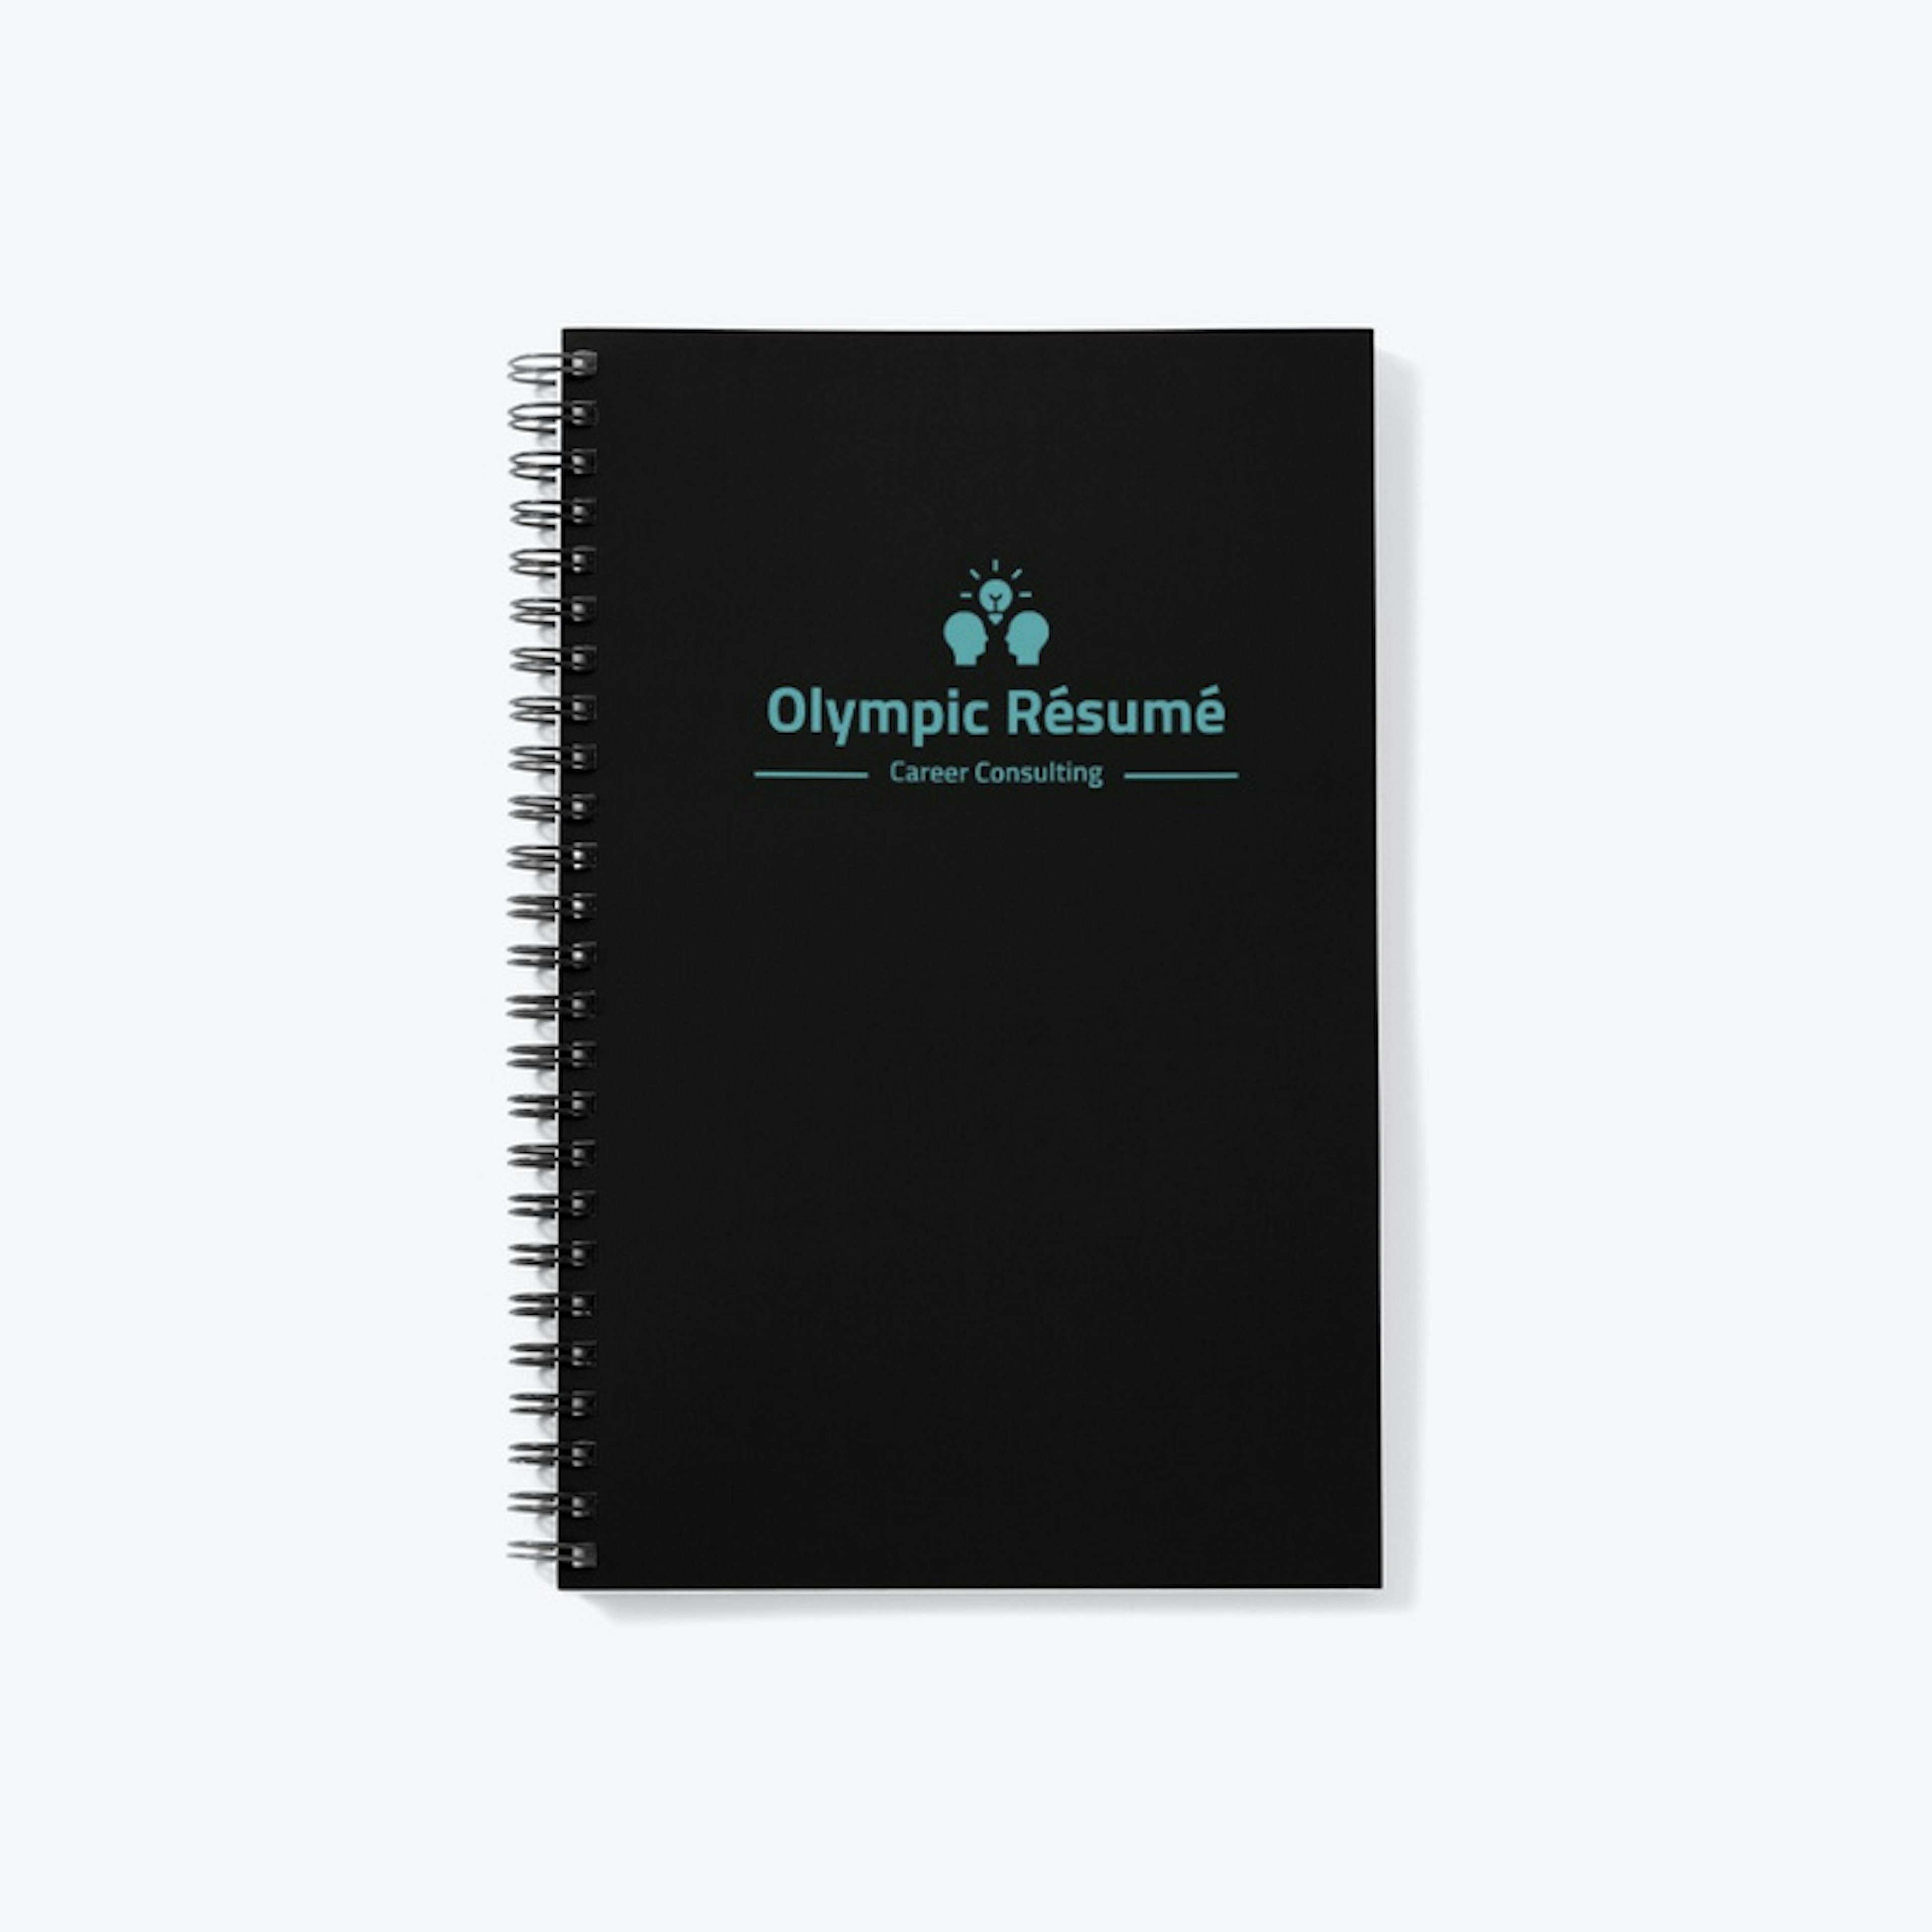 Olympic Resume | Trendy Snazzy Notebook